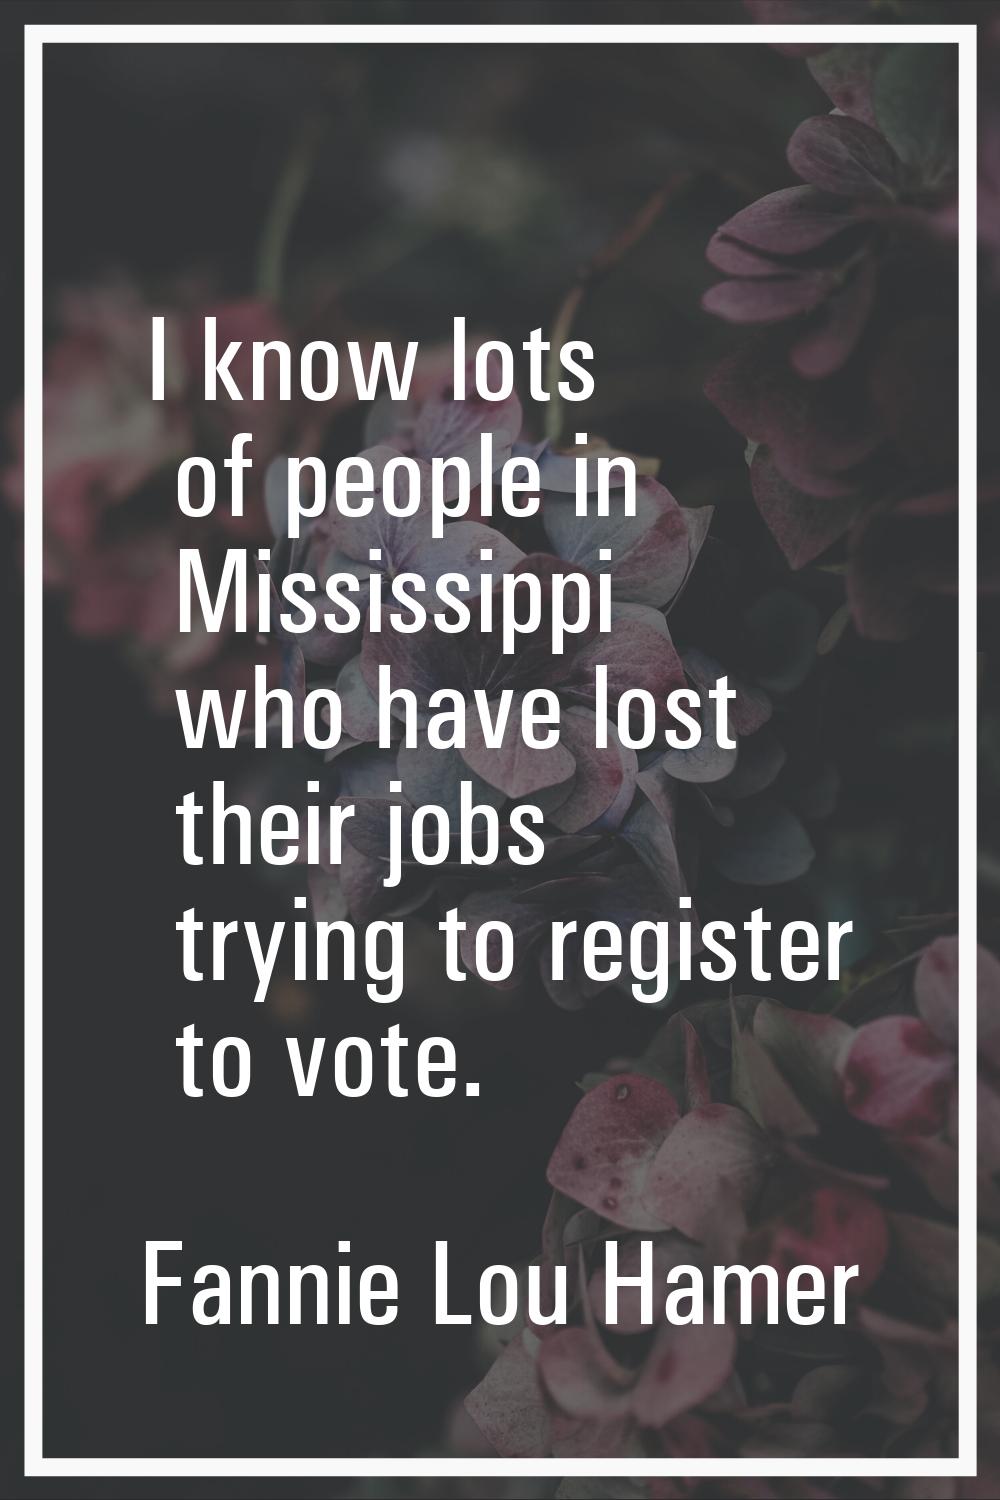 I know lots of people in Mississippi who have lost their jobs trying to register to vote.